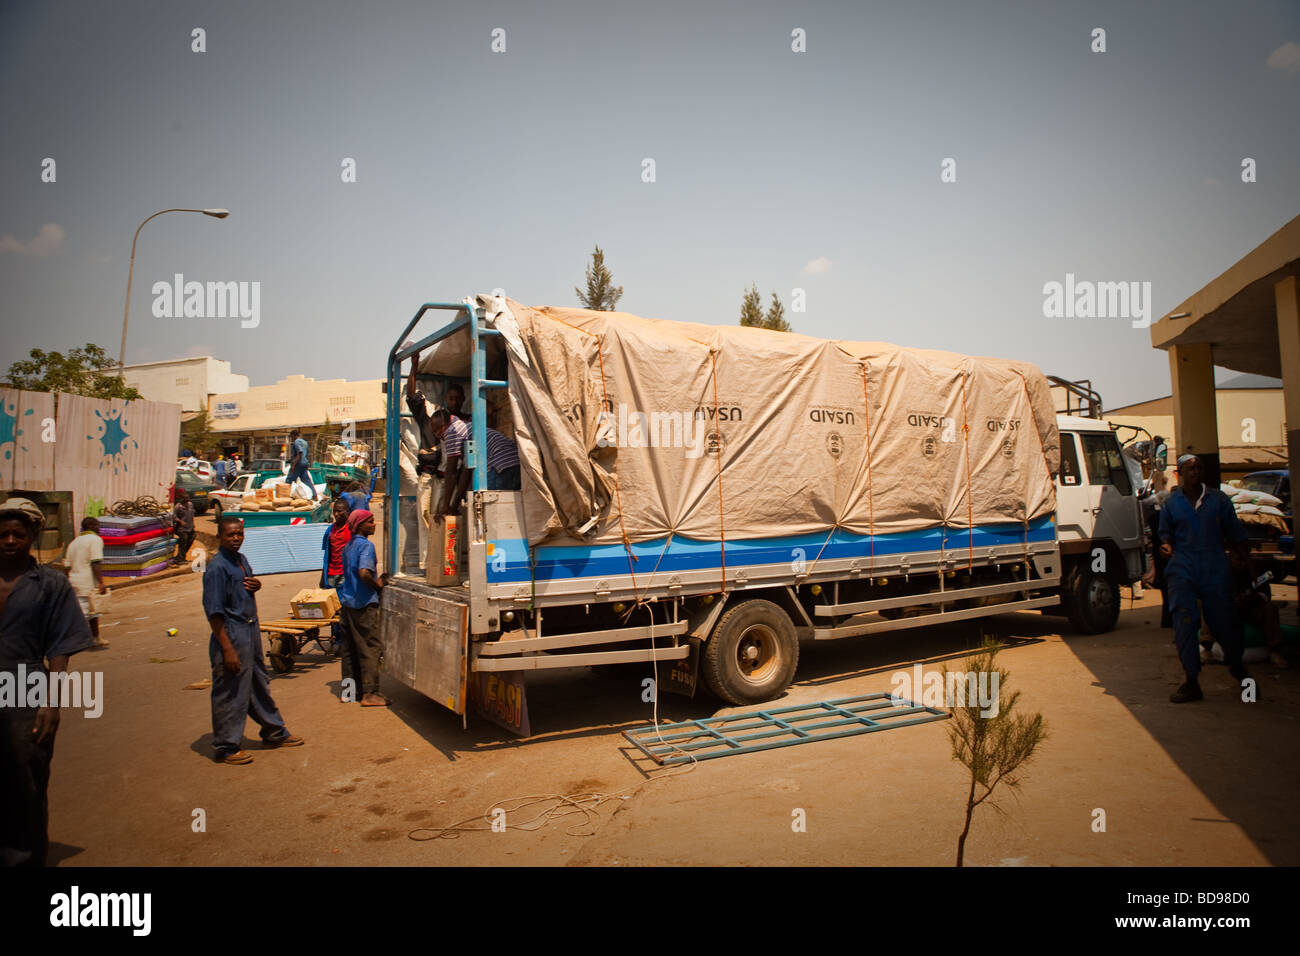 A USAid truck delivers goods to the citizens of Kigali, Rwanda. Stock Photo